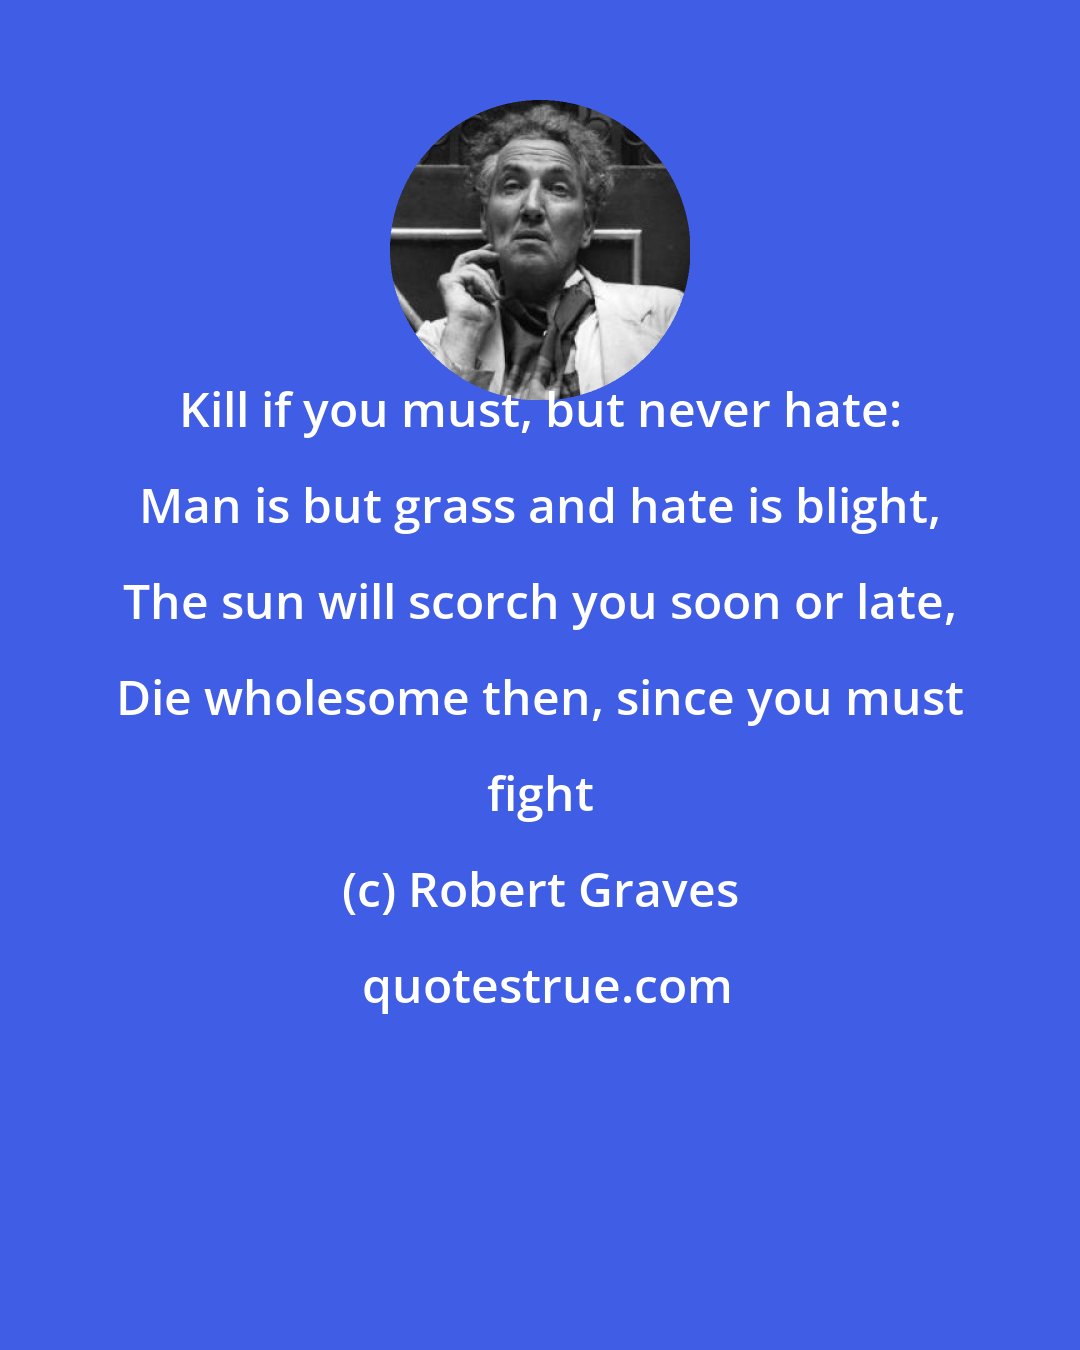 Robert Graves: Kill if you must, but never hate: Man is but grass and hate is blight, The sun will scorch you soon or late, Die wholesome then, since you must fight